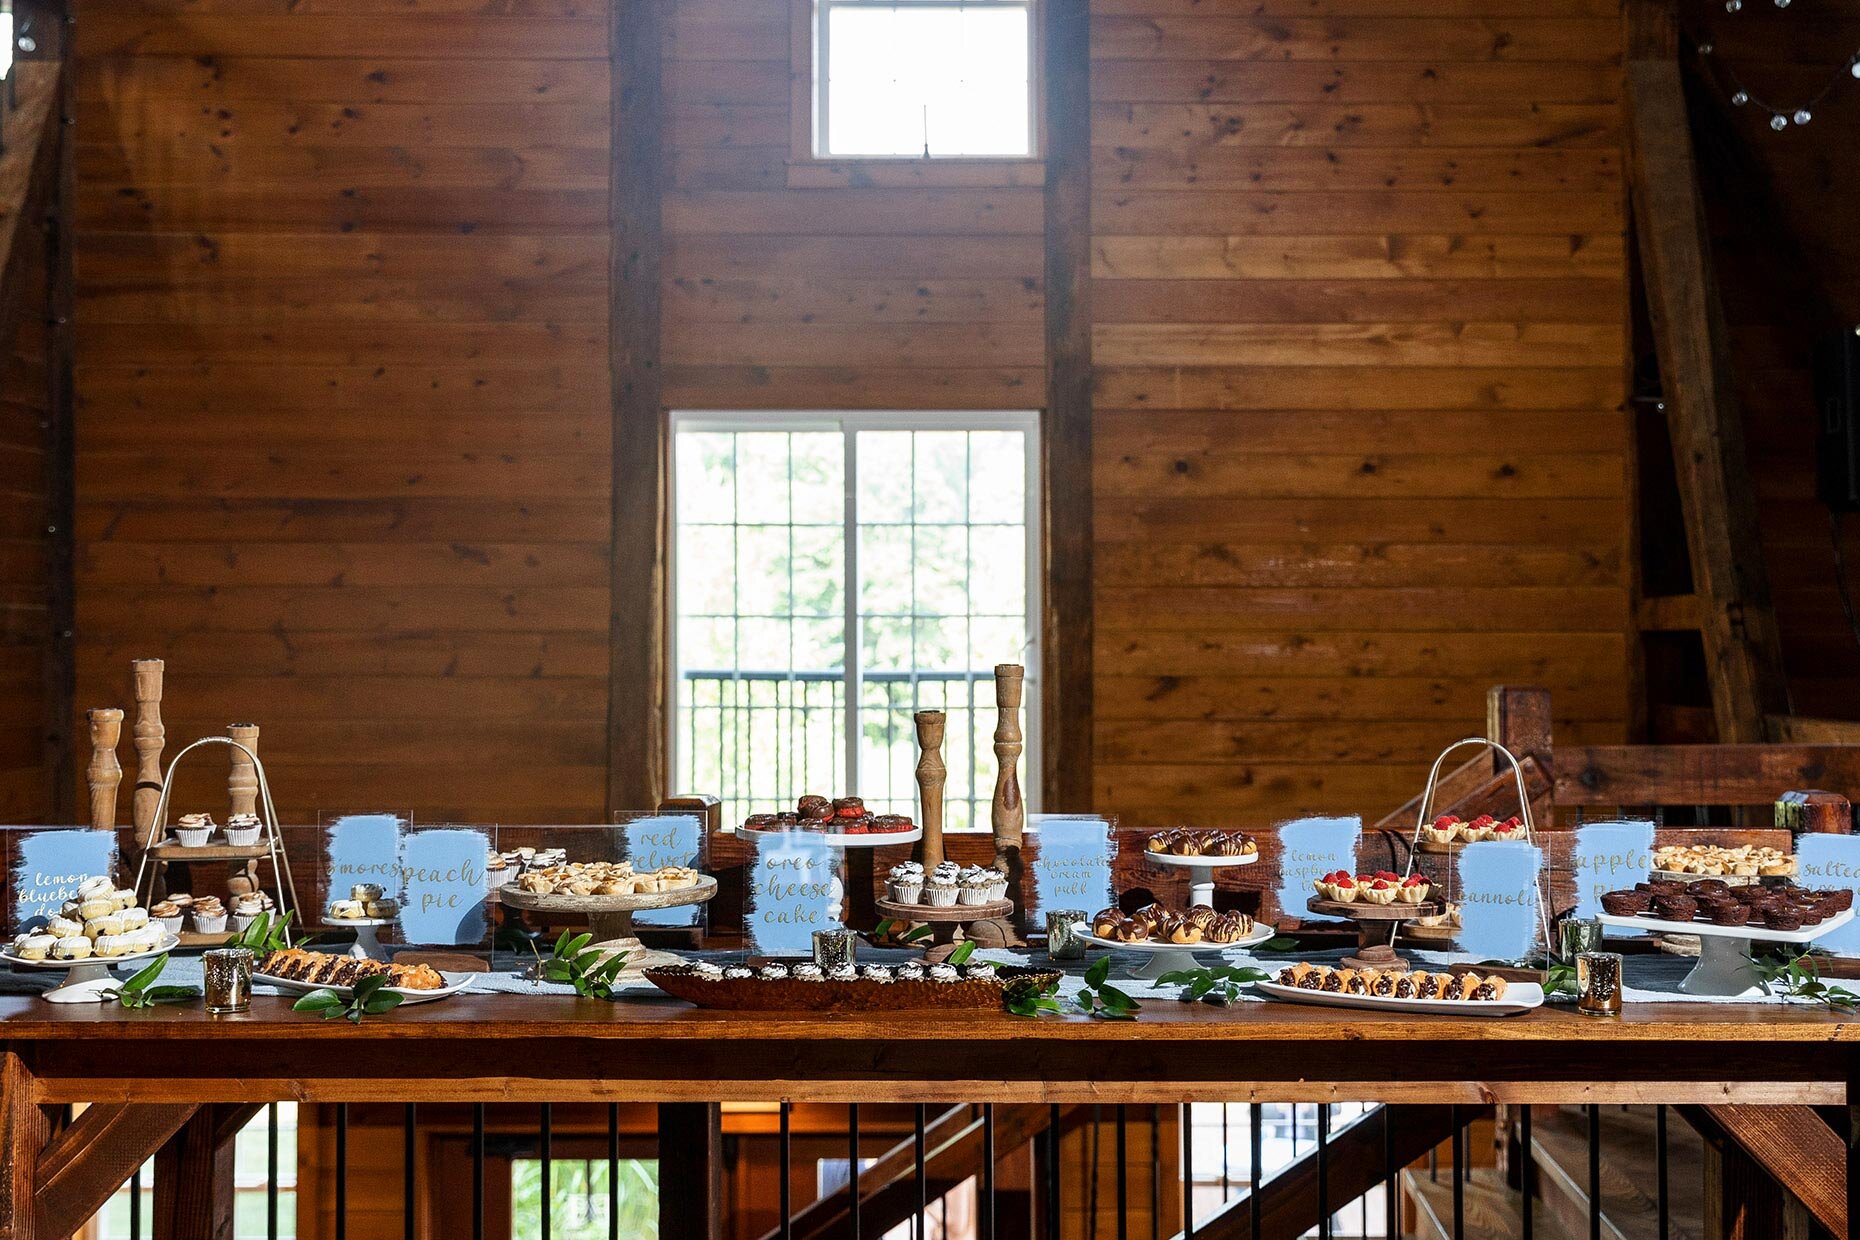 Dessert table with dusty blue signs